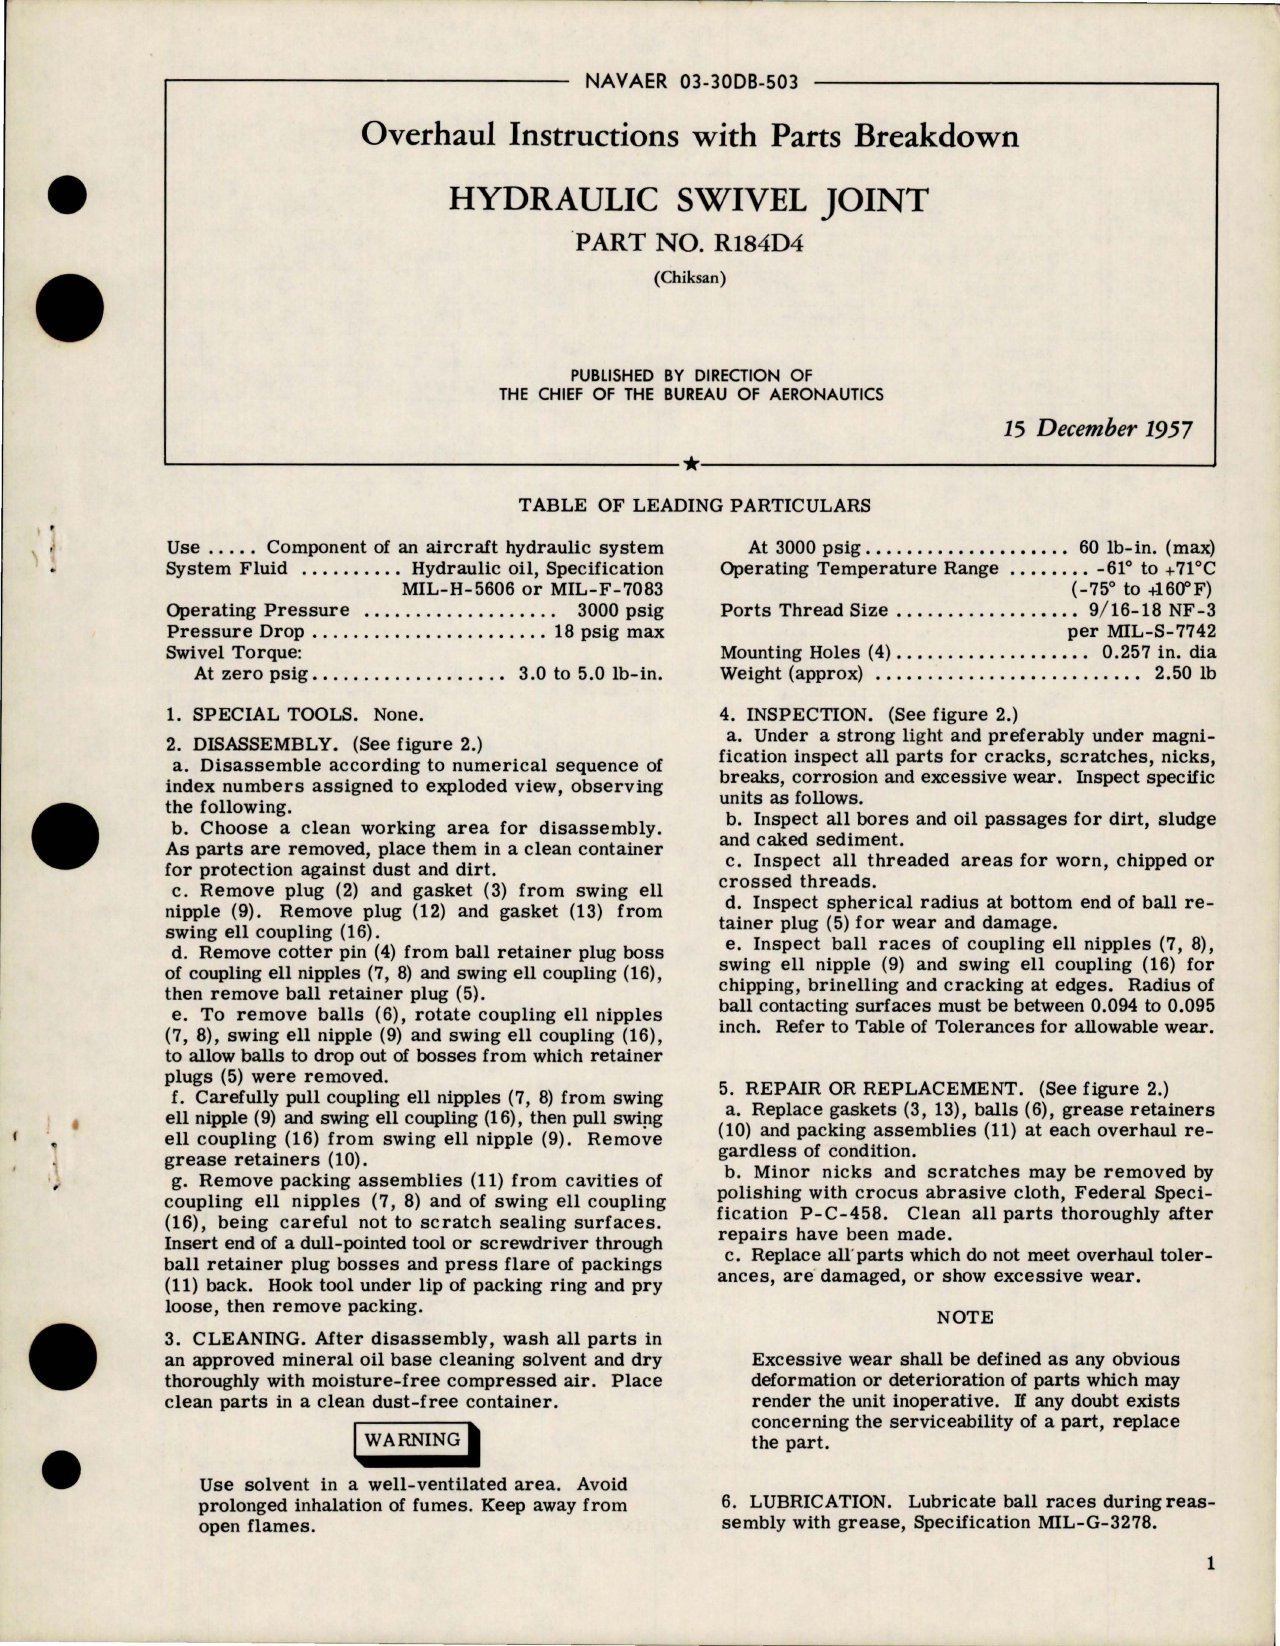 Sample page 1 from AirCorps Library document: Overhaul Instructions with Parts Breakdown for Hydraulic Swivel Joint - Part R184D4 